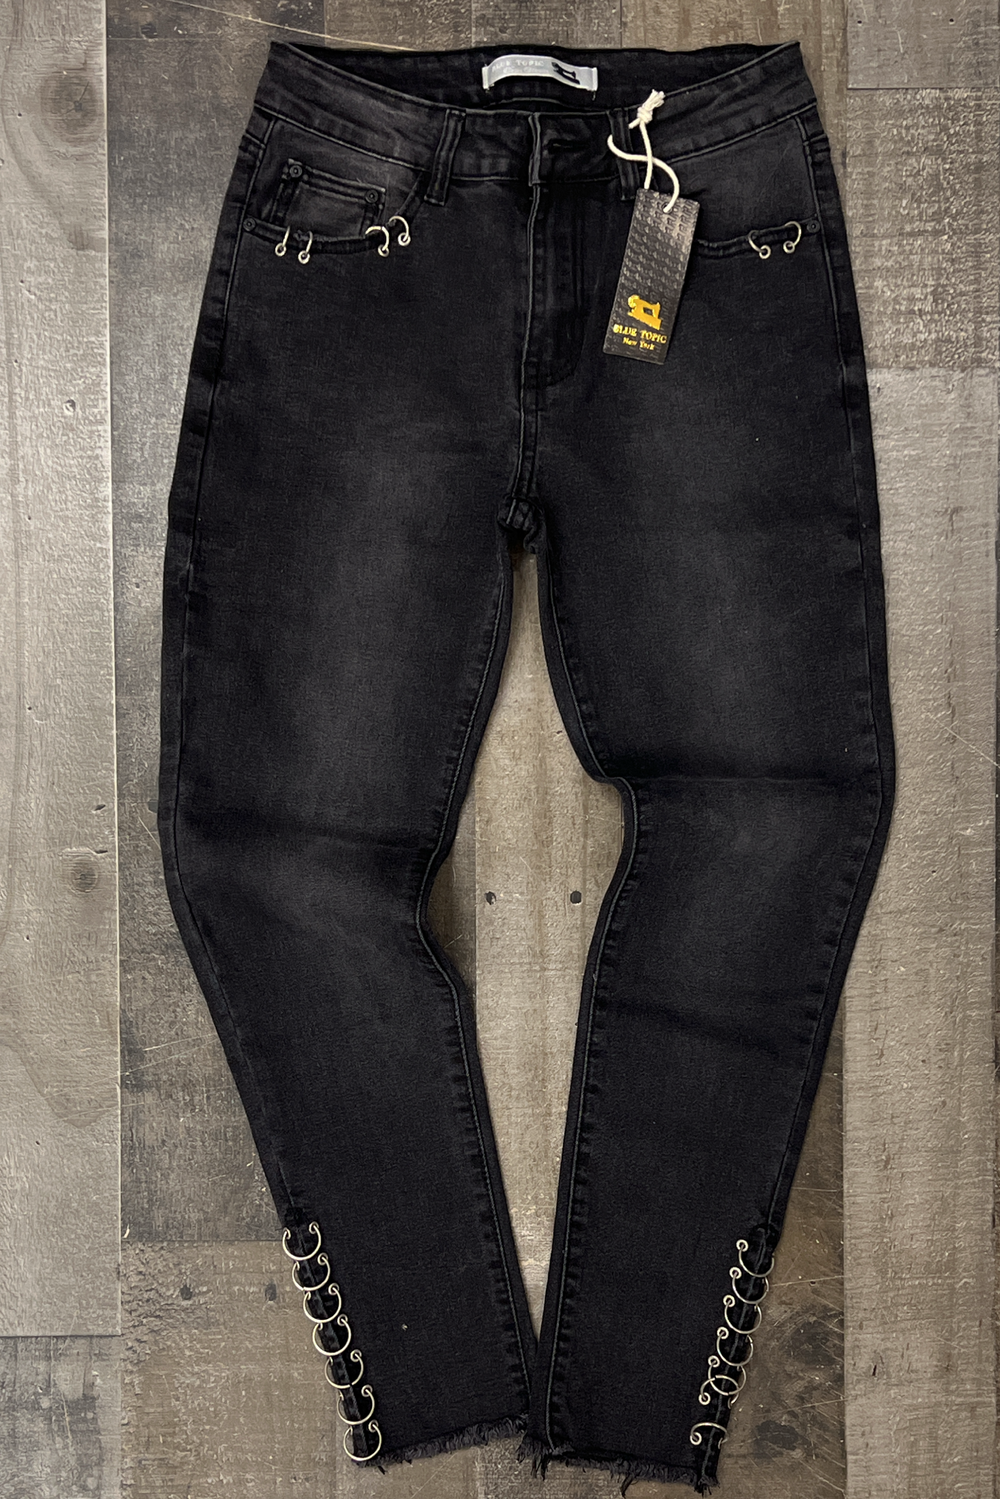 Blue Topic - hook jeans (womens)